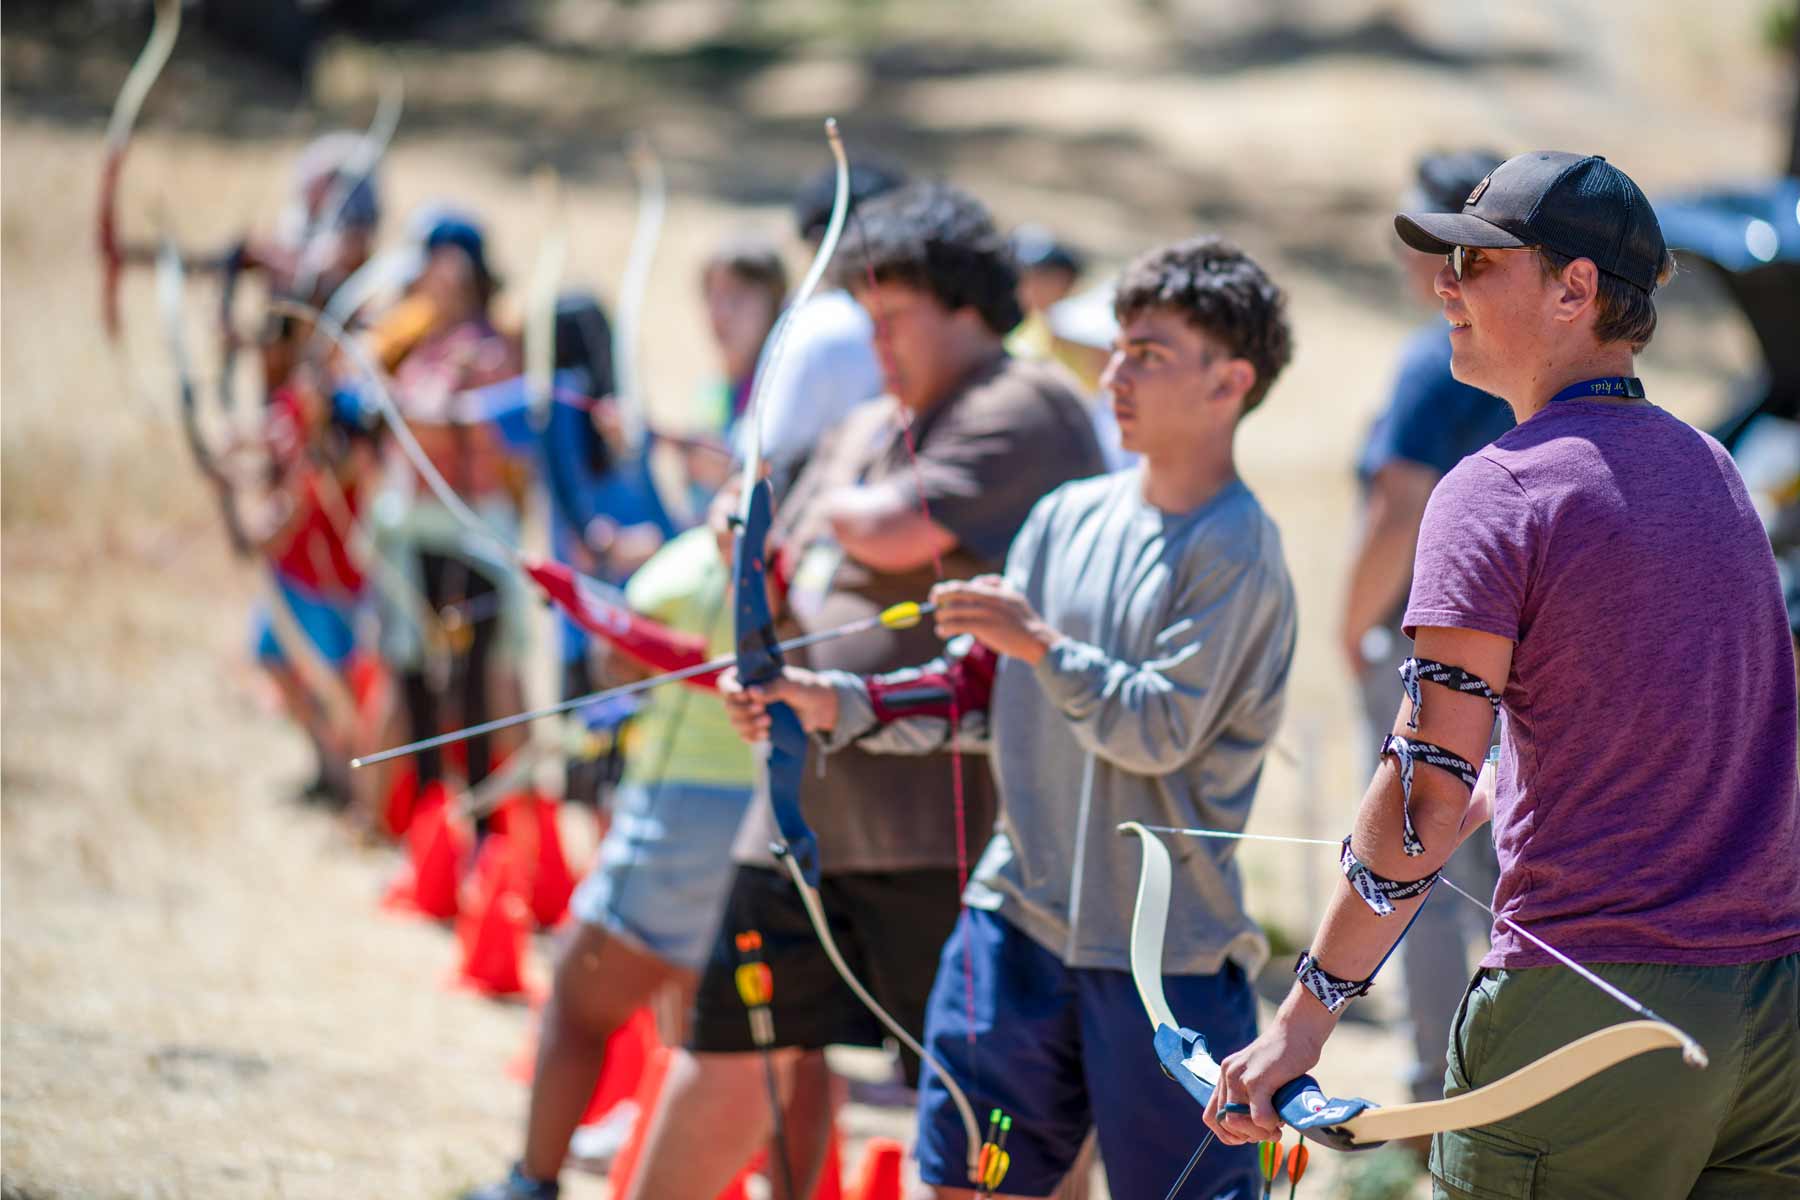 A group of teenagers with limb differences practices archery in a field.